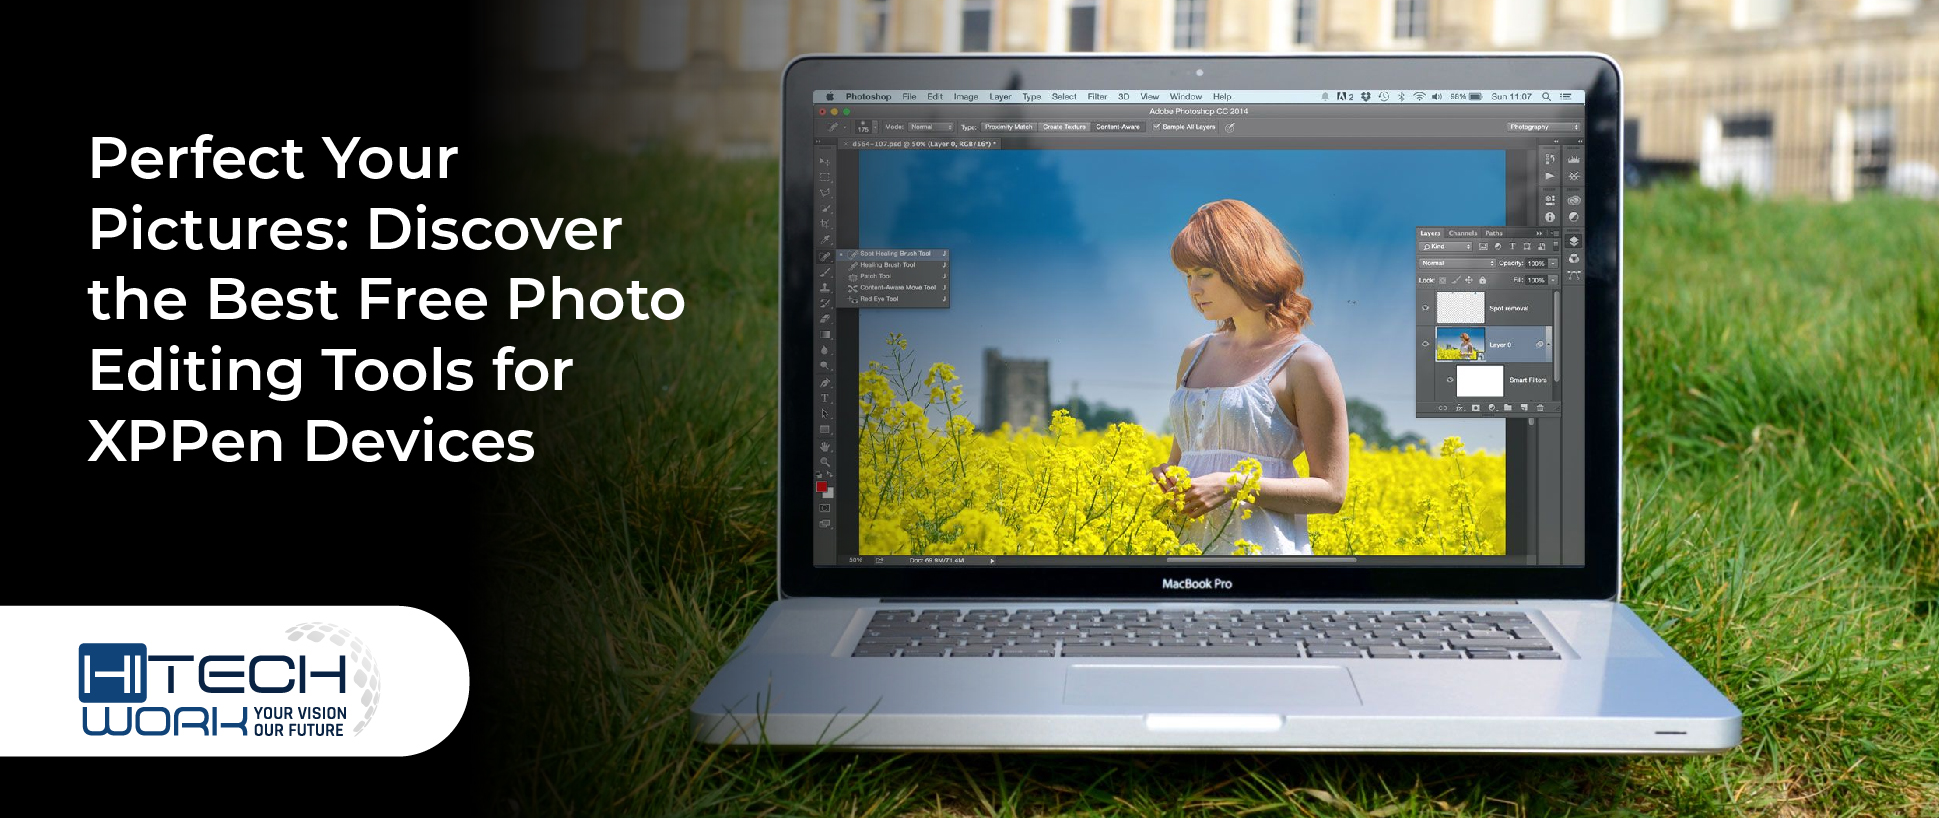 Best Free Photo Editing Tools for XPPen Devices